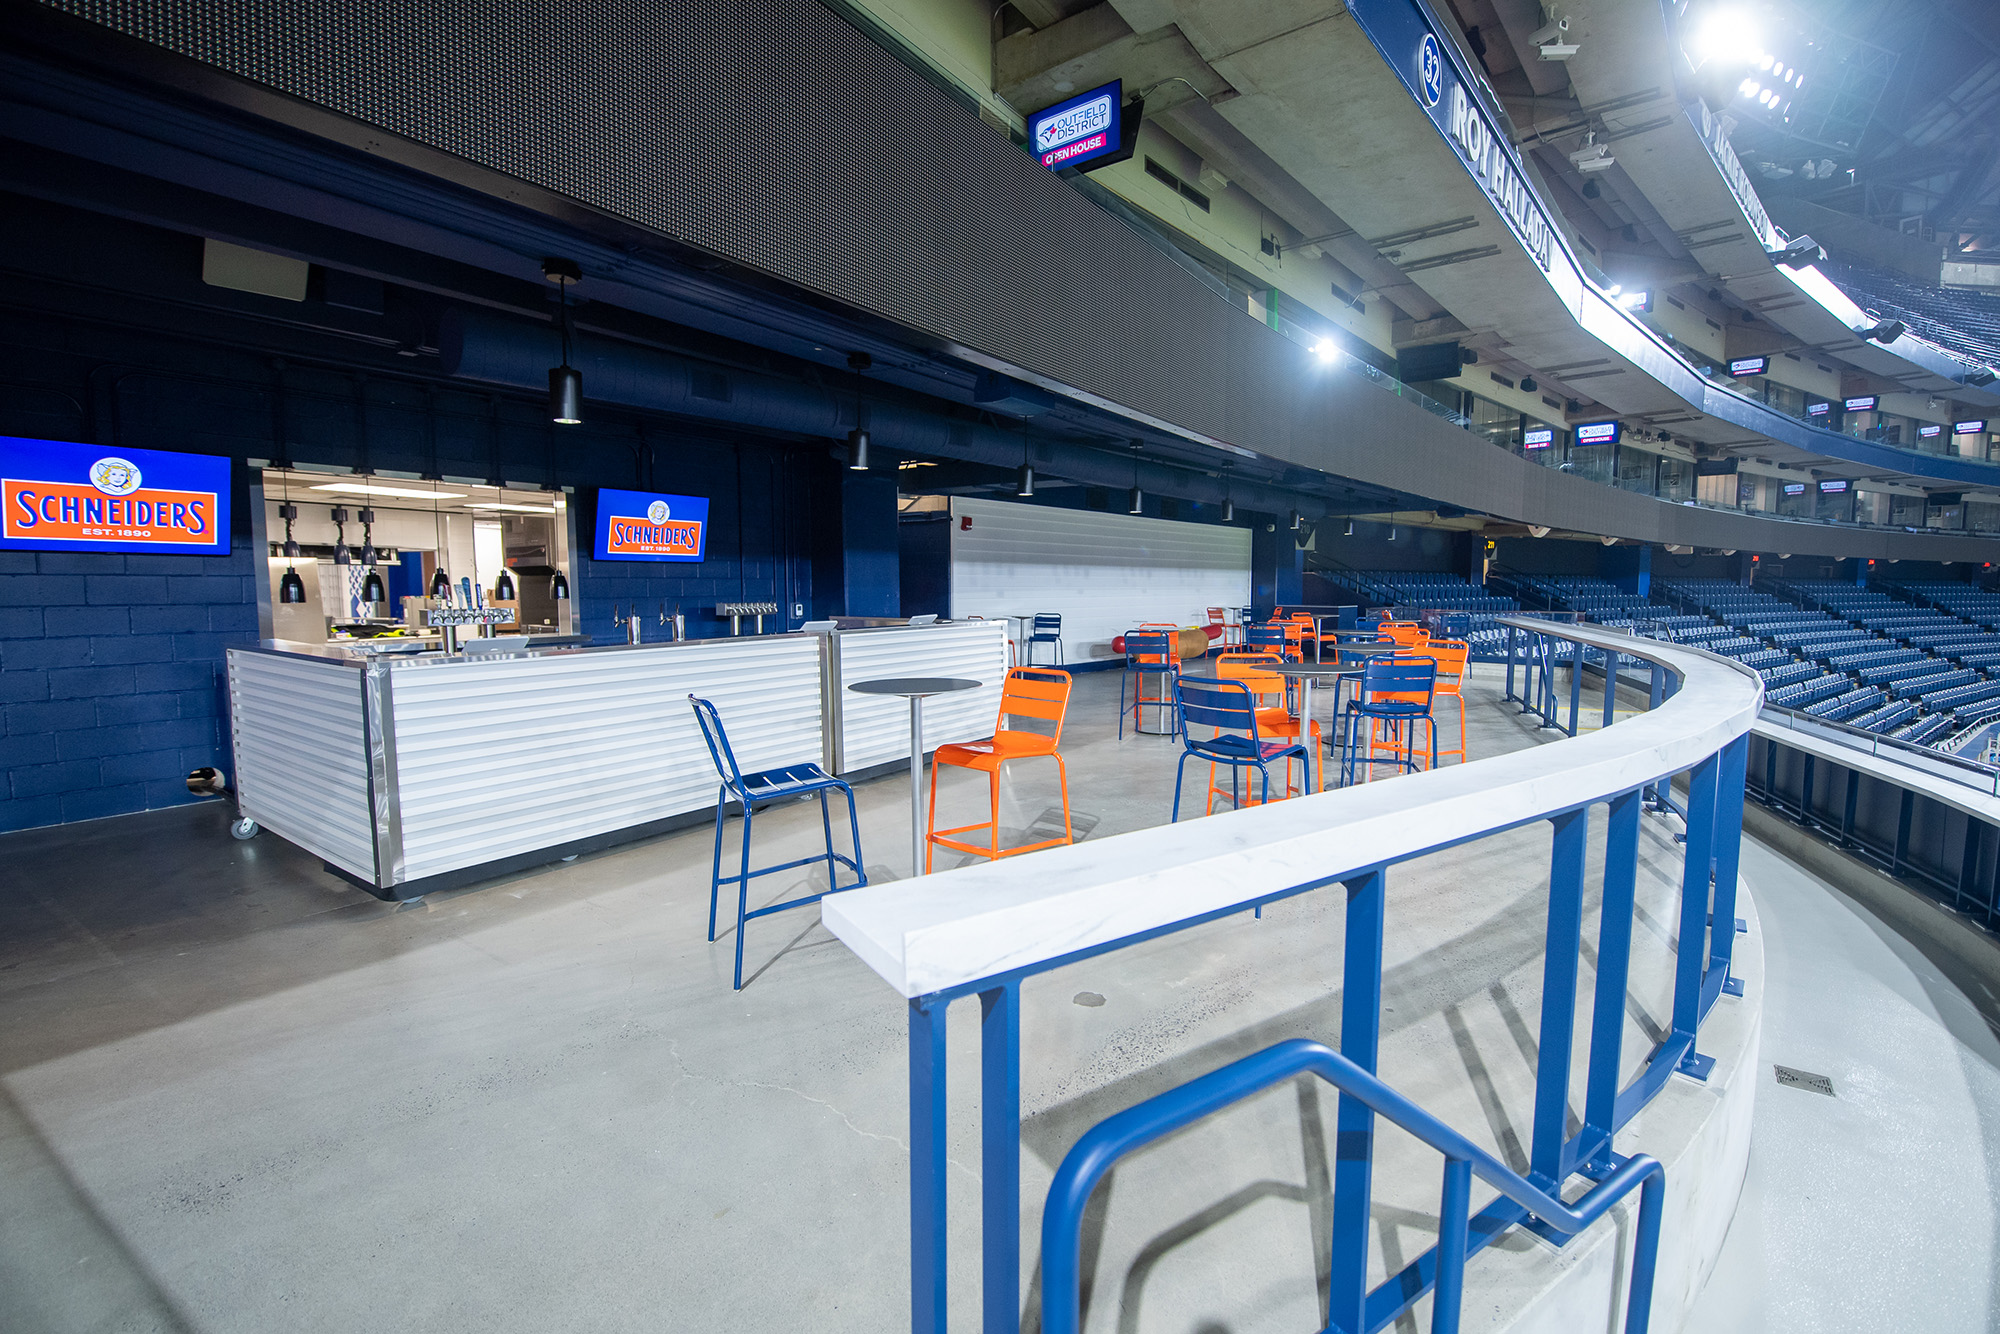 Cool Behind-The-Scenes Look at Rogers Centre in Toronto